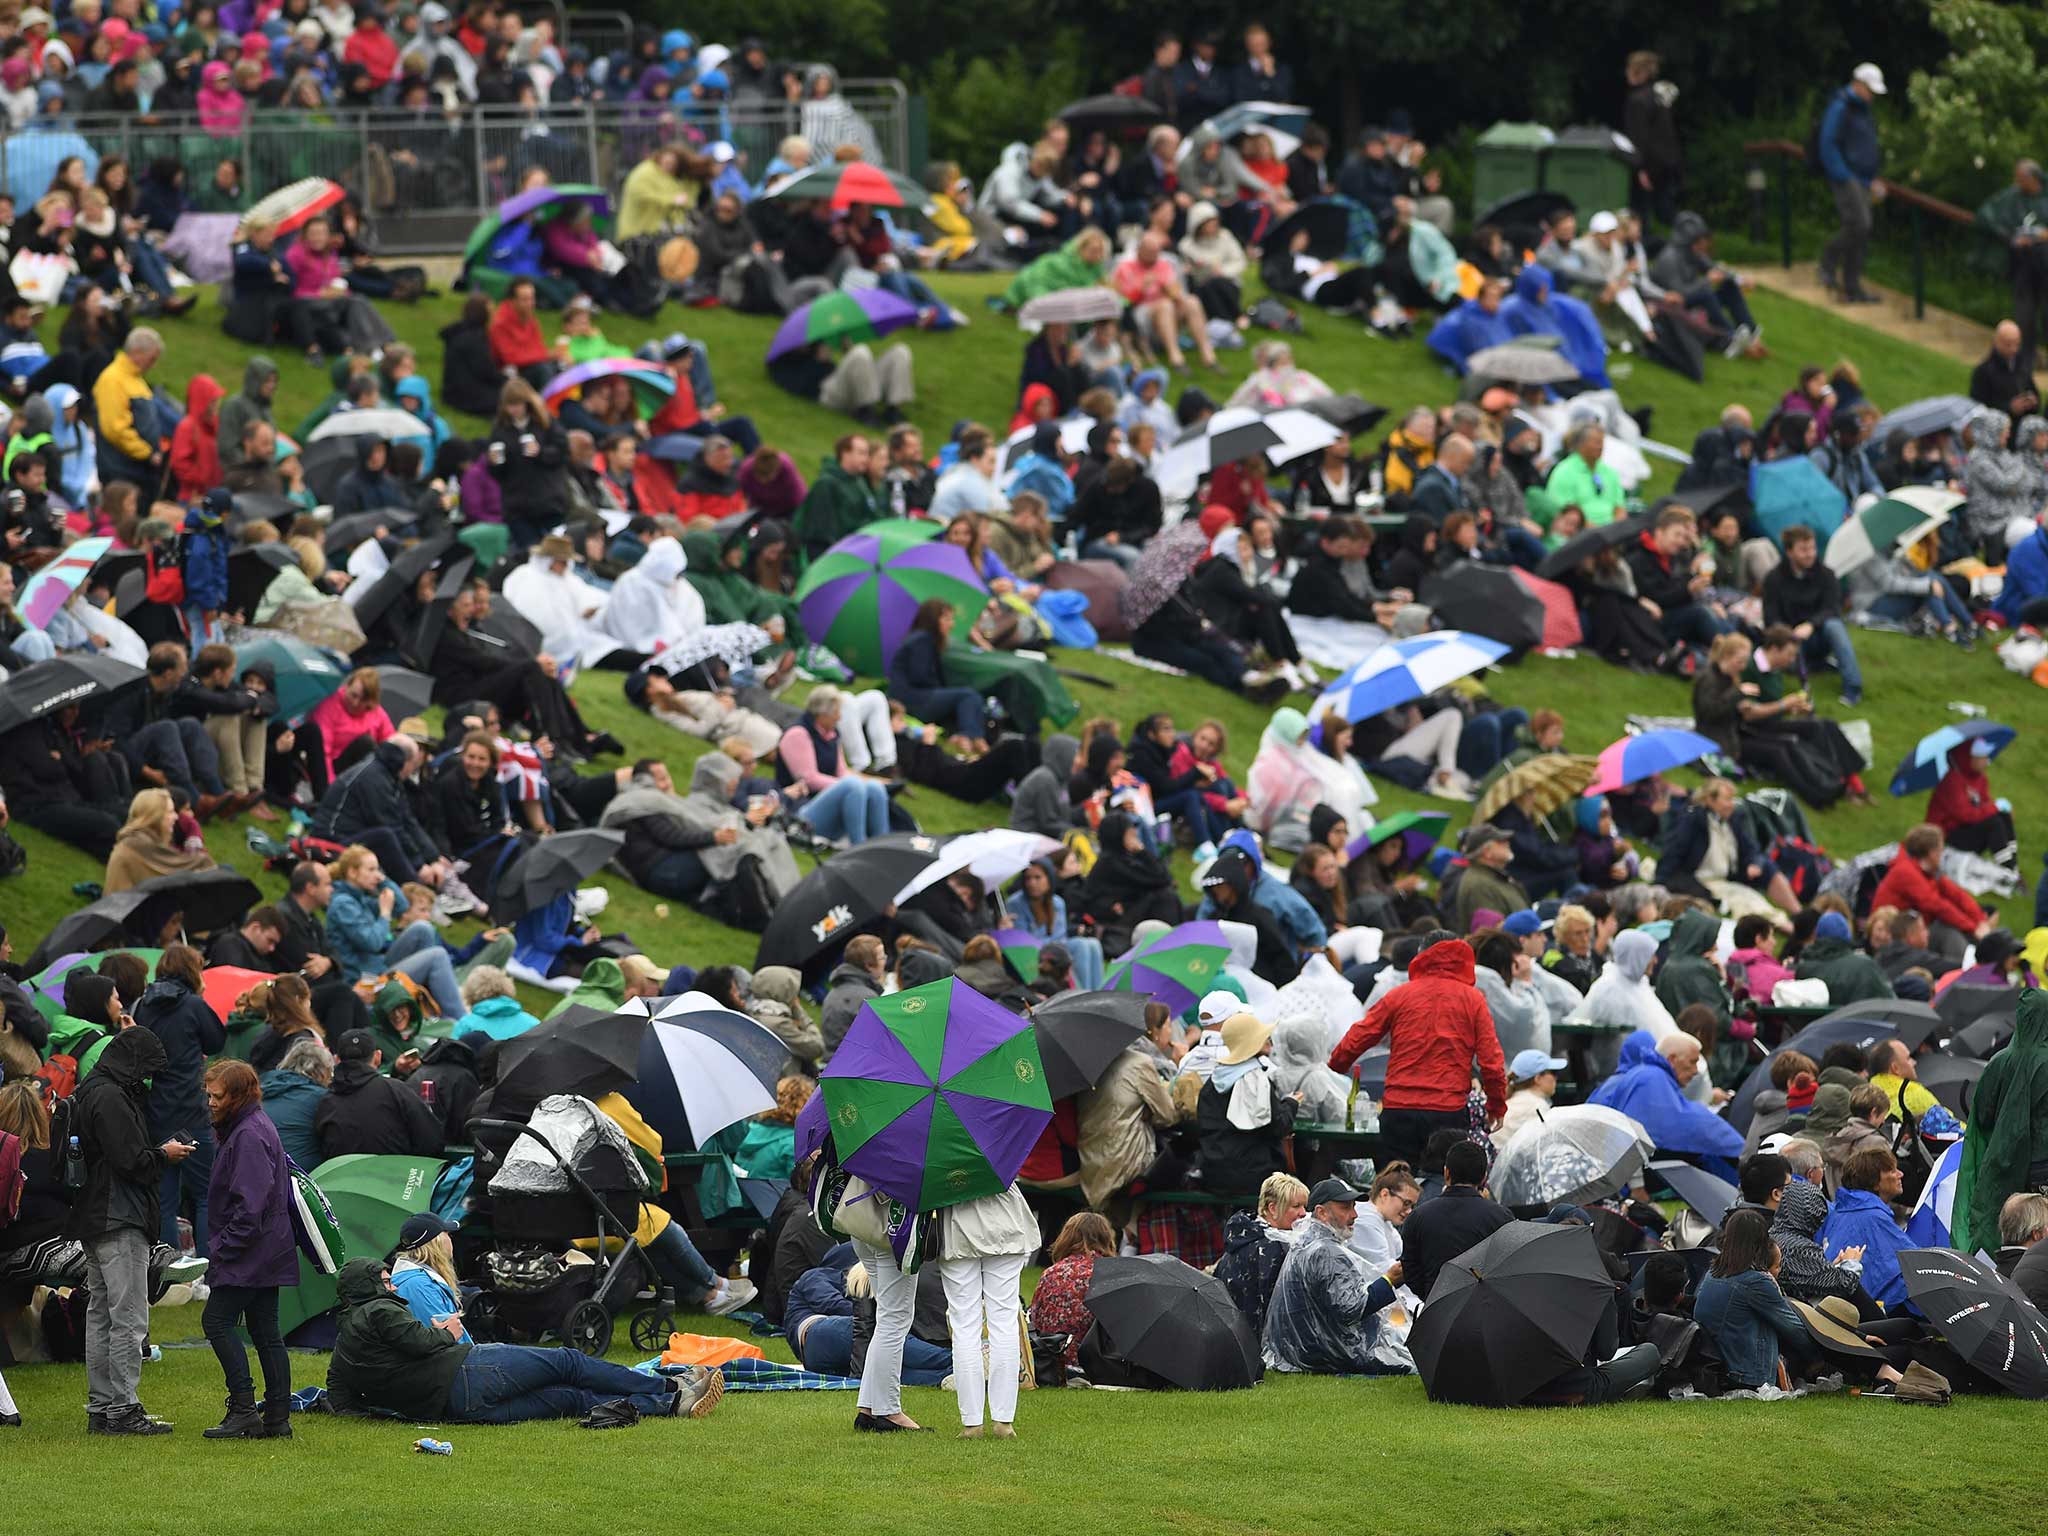 The wet weather has wreaked havoc on the first week of Wimbledon